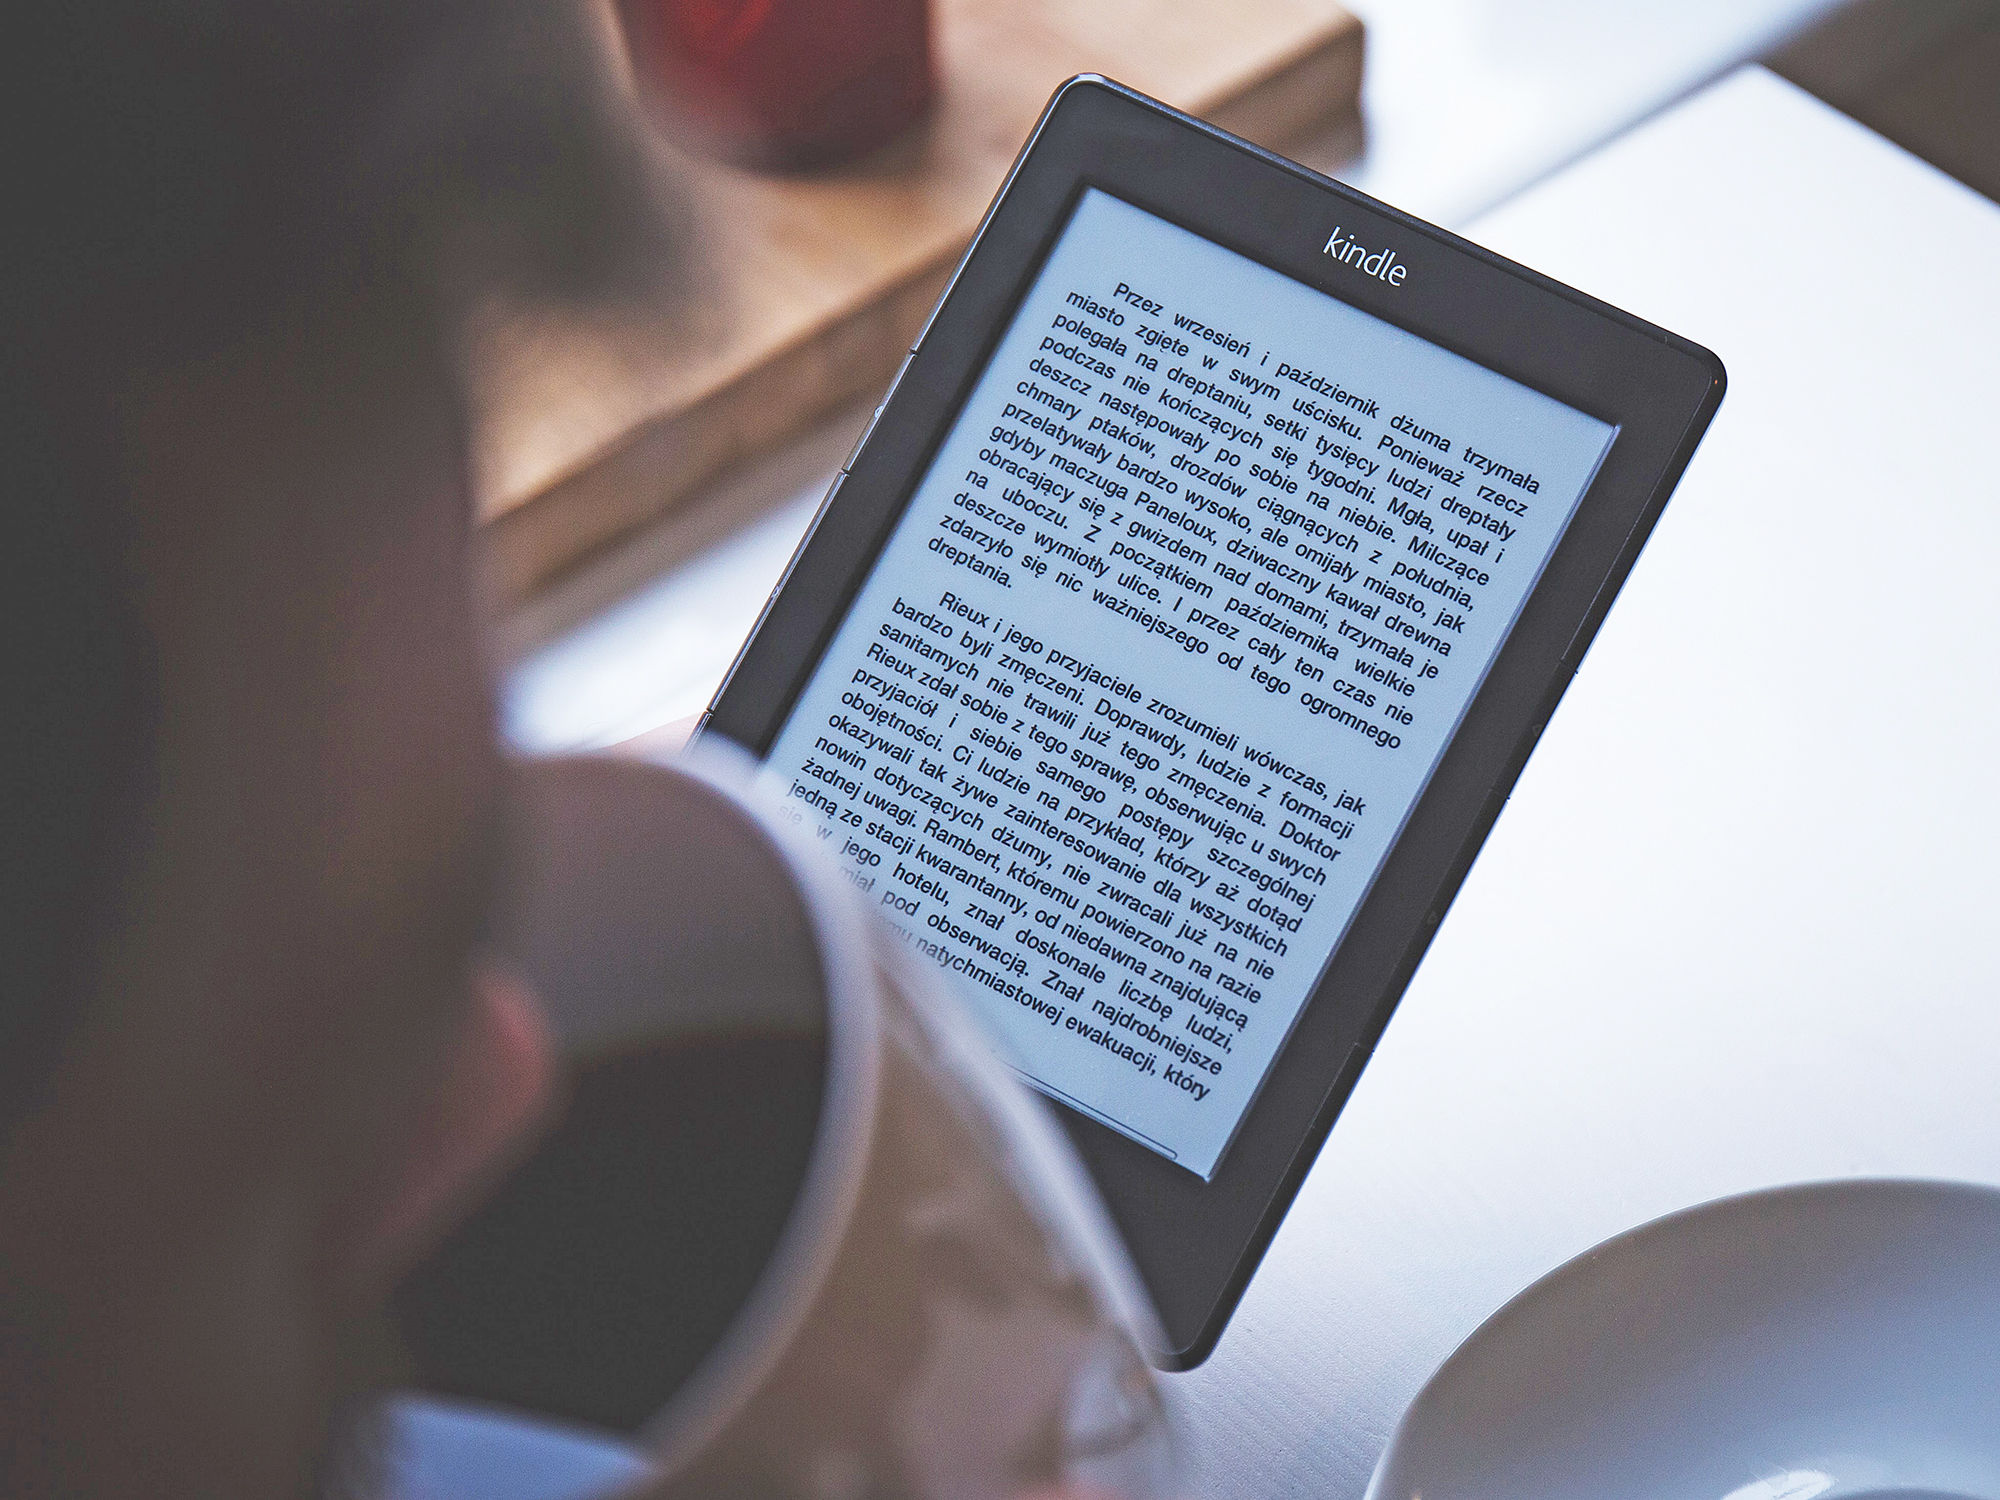 Your e-reader can display more than just books